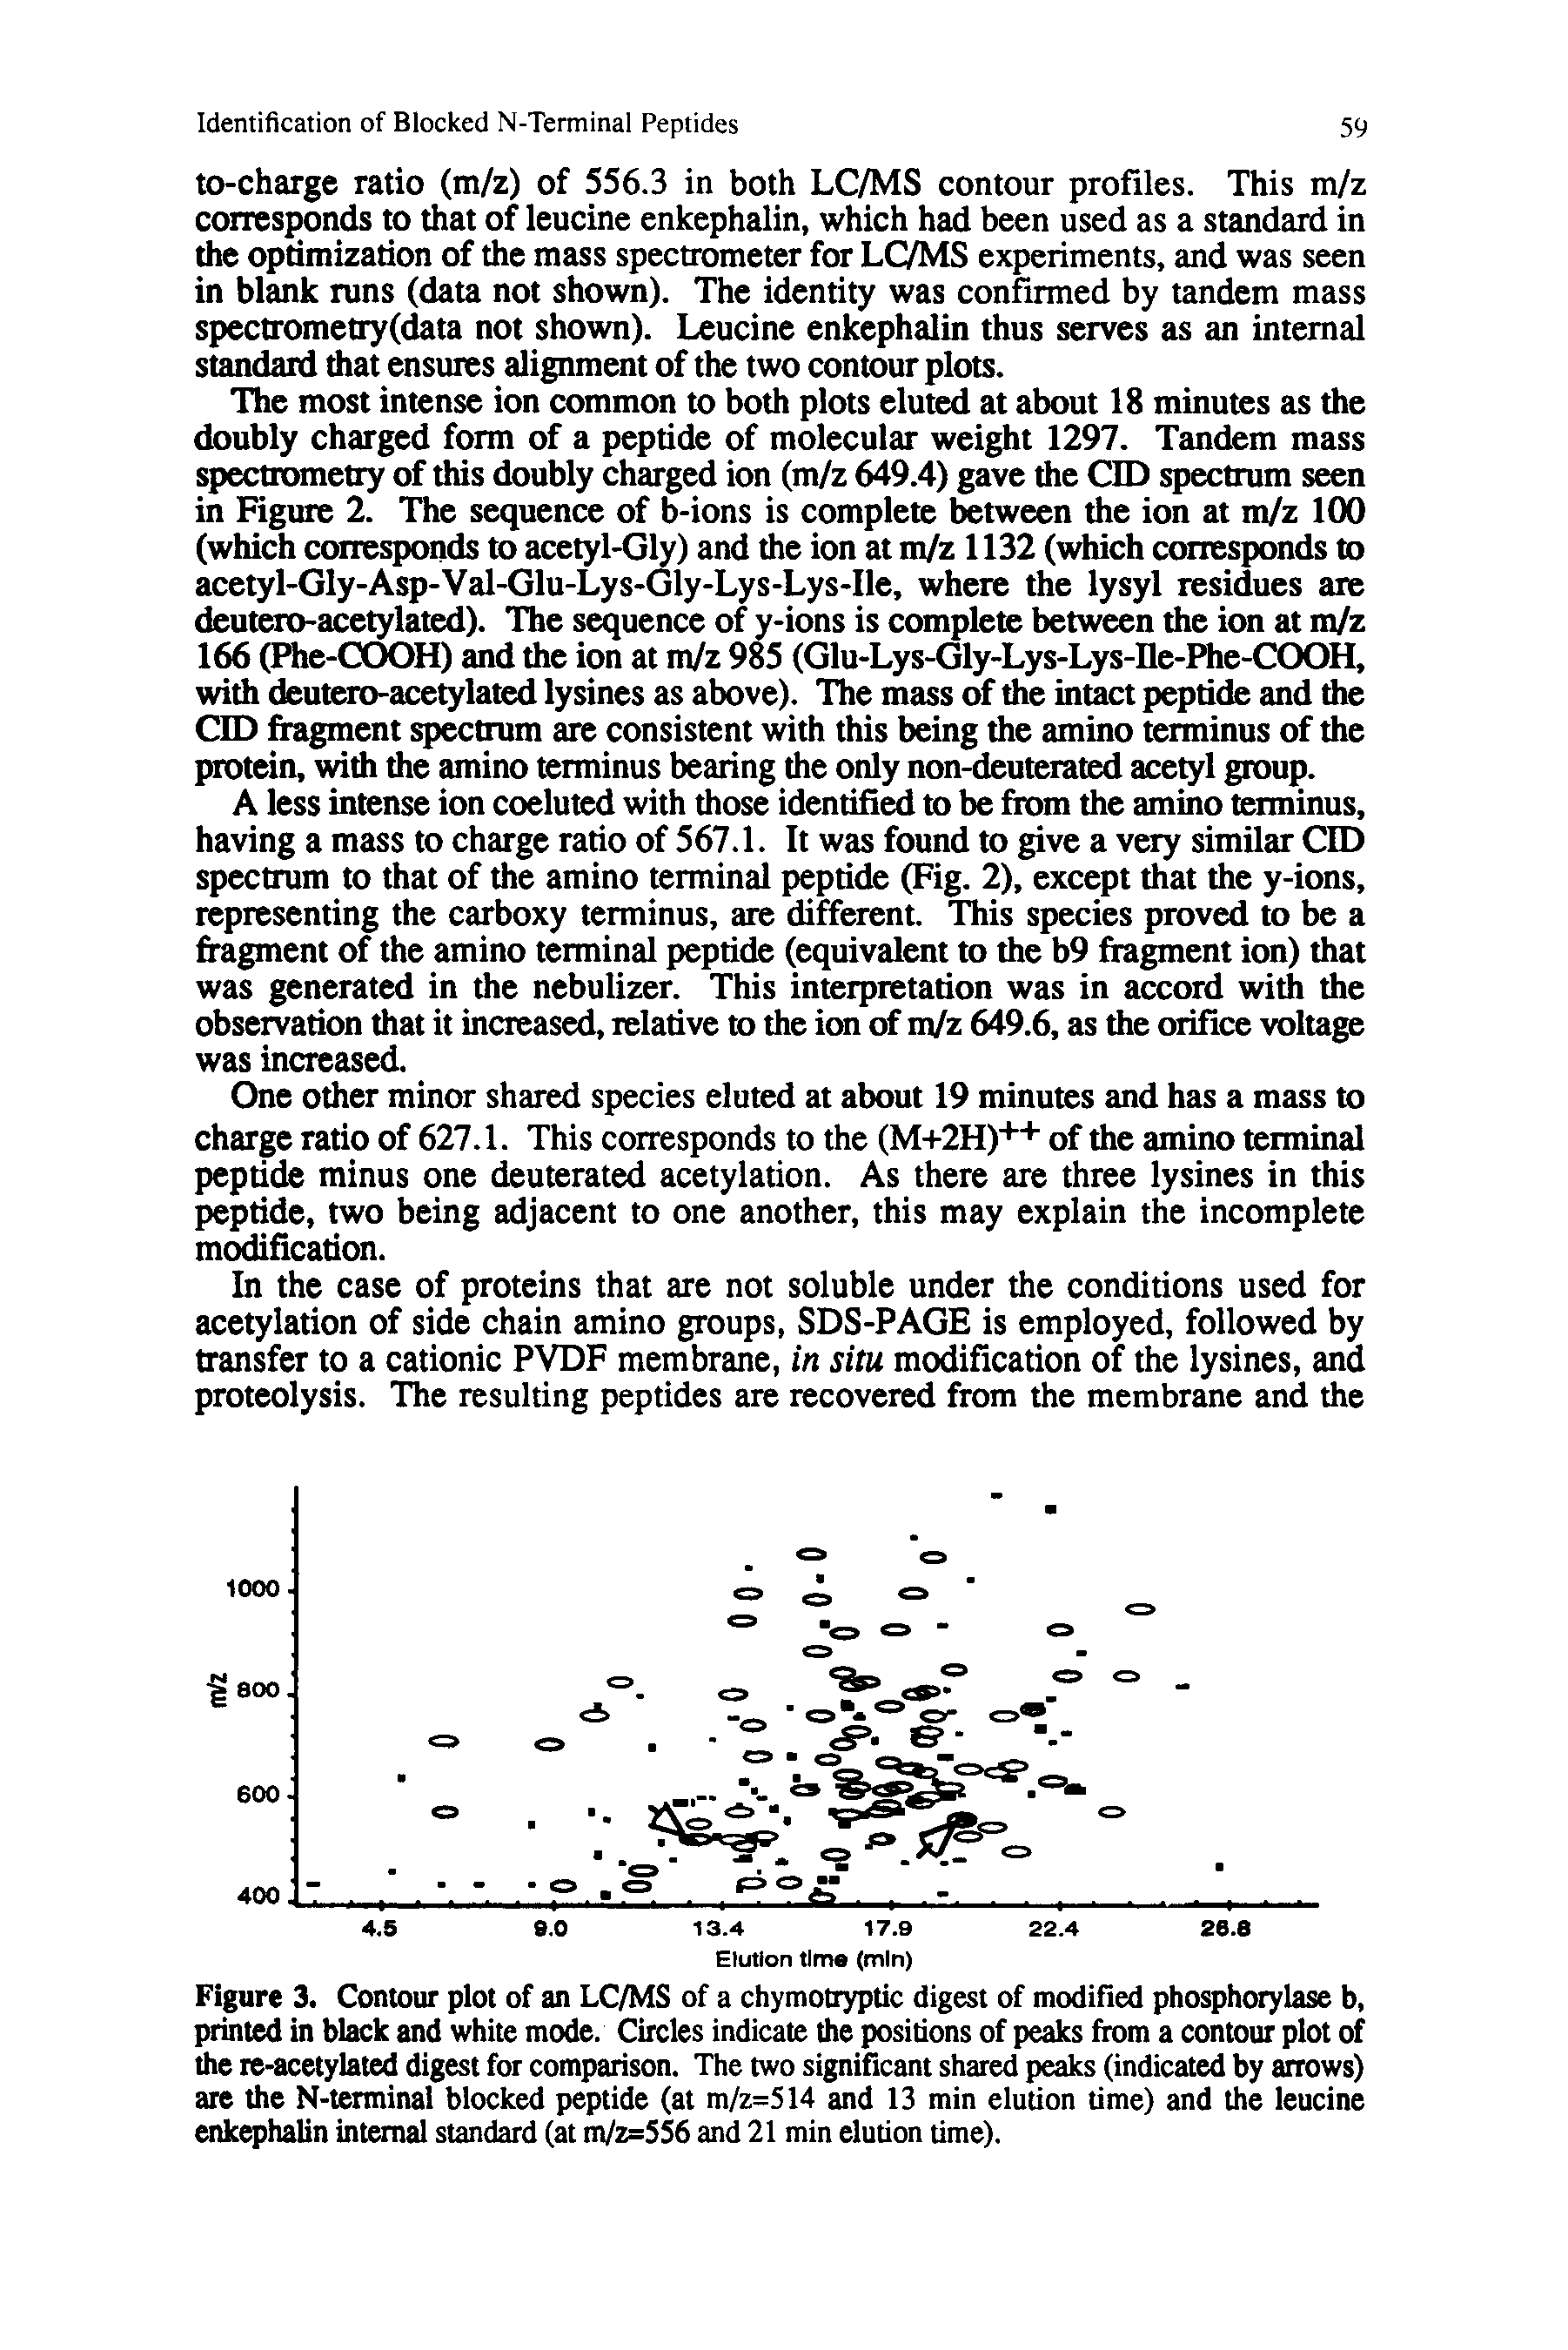 Figure 3. Contour plot of an LC/MS of a chymotryptic digest of modifled phosphorylase b, printed in black and white mode. Circles indicate the positions of peaks from a contour plot of the le-acetylated digest for comparison. The two significant shared peaks (indicated by arrows) are the N-terminal blocked peptide (at m/z=514 and 13 min elution time) and the leucine enkephalin internal standard (at m/z=SS6 and 21 min elution time).